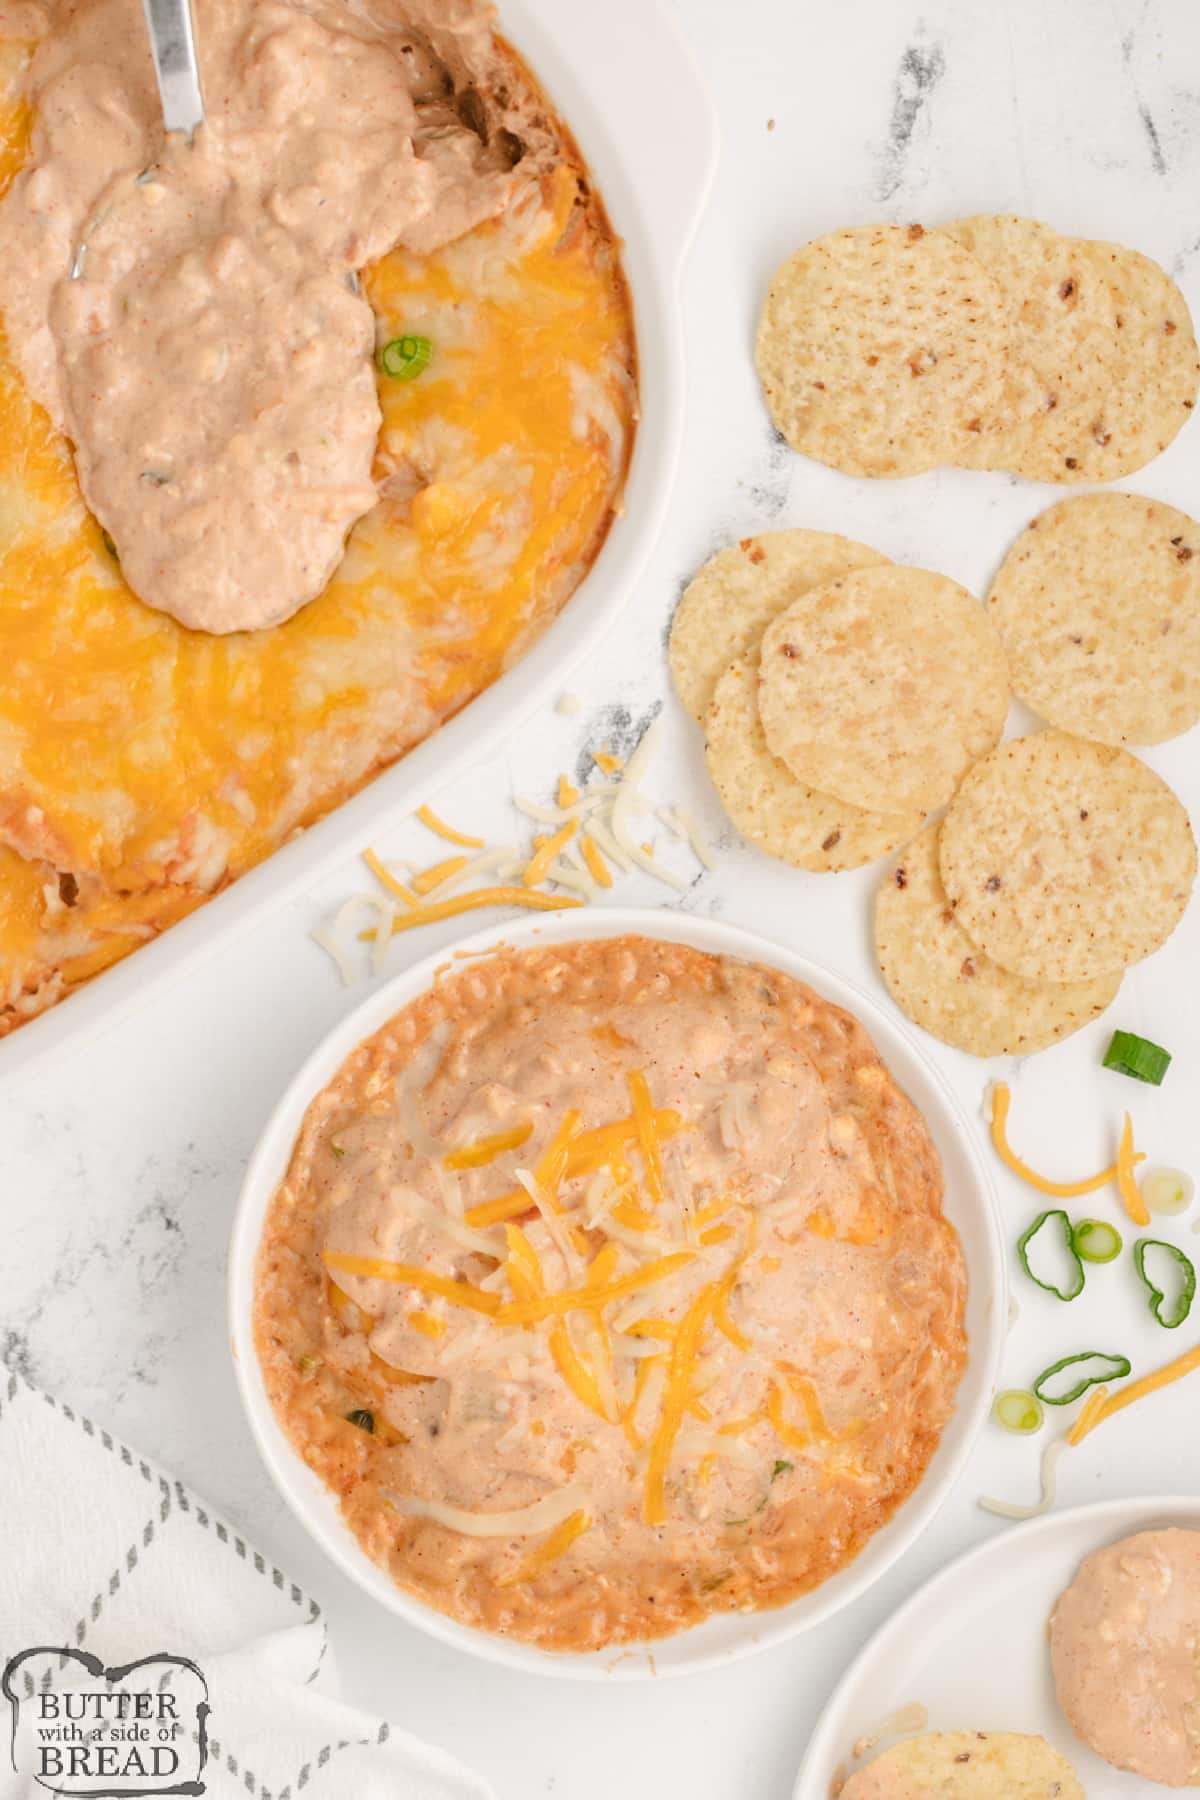 Refried bean dip made with salsa, cream cheese, sour cream, and melted cheese. 